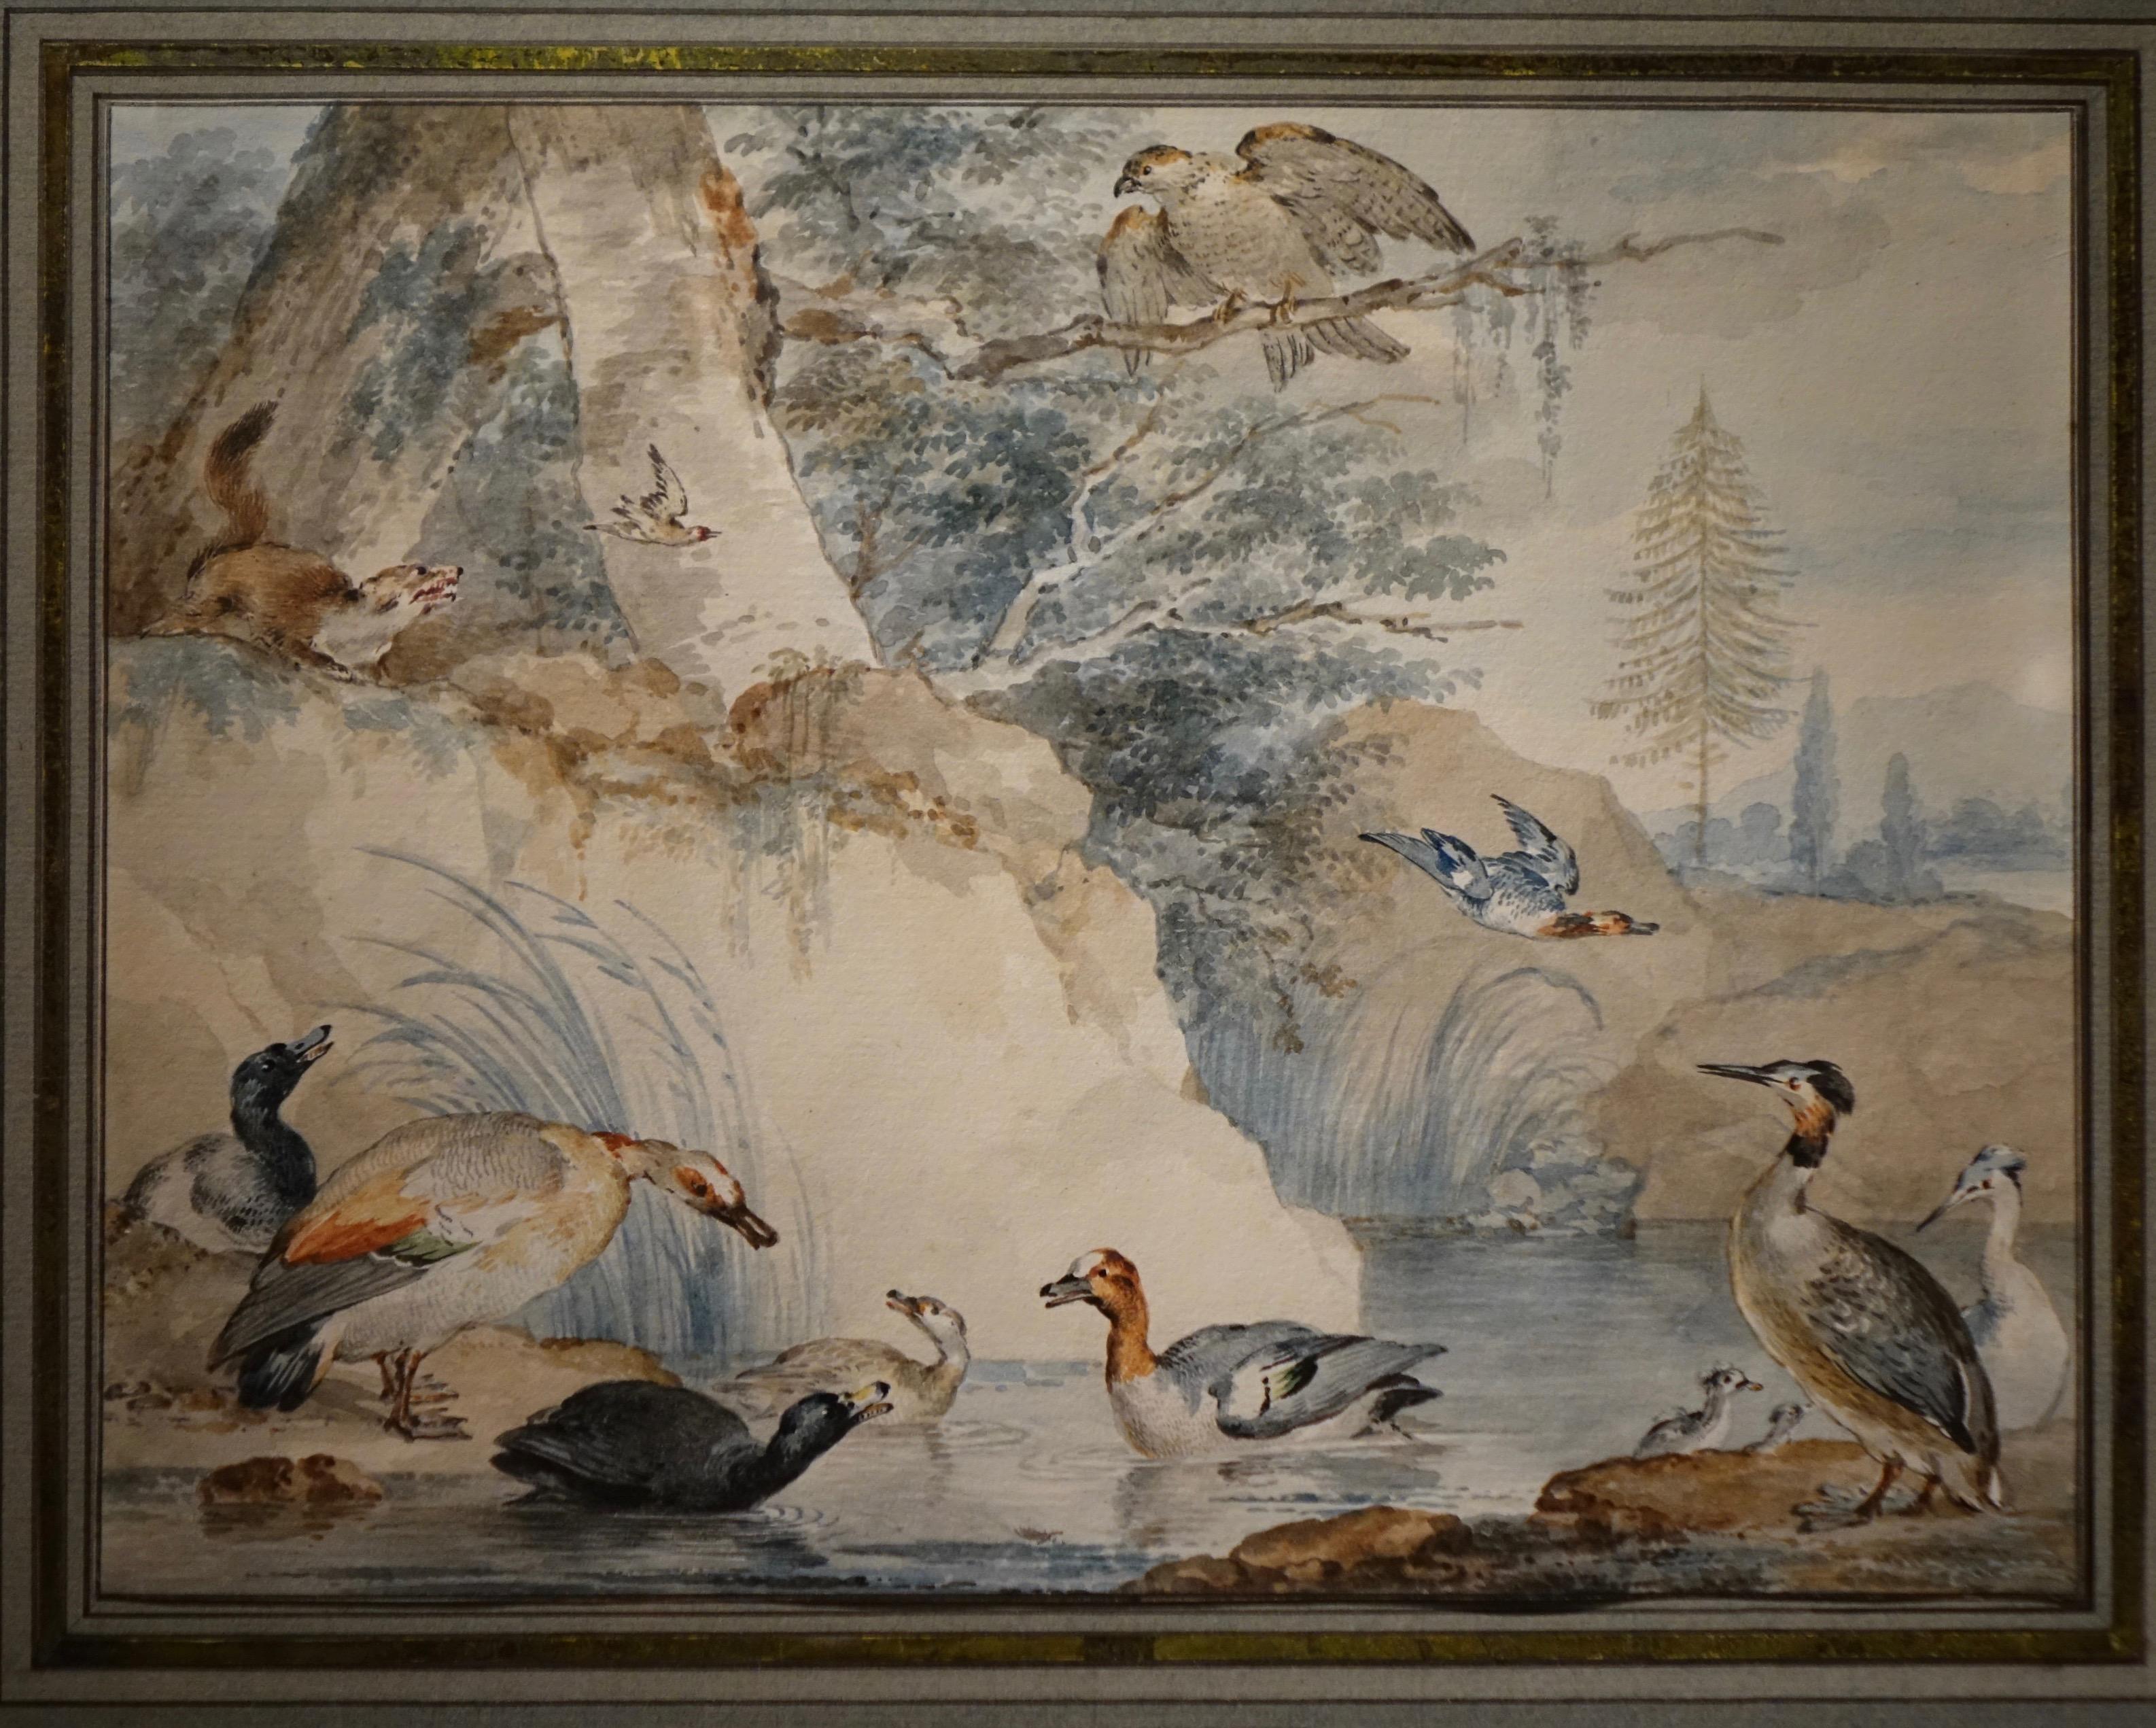 Watercolor attributed to Aert Schouman (1710-1792) 
He was a prolific and versatile Dutch painter, glass engraver, printmaker, collector and dealer, who produced still lifes, biblical and mythological themes, natural history studies, genre,